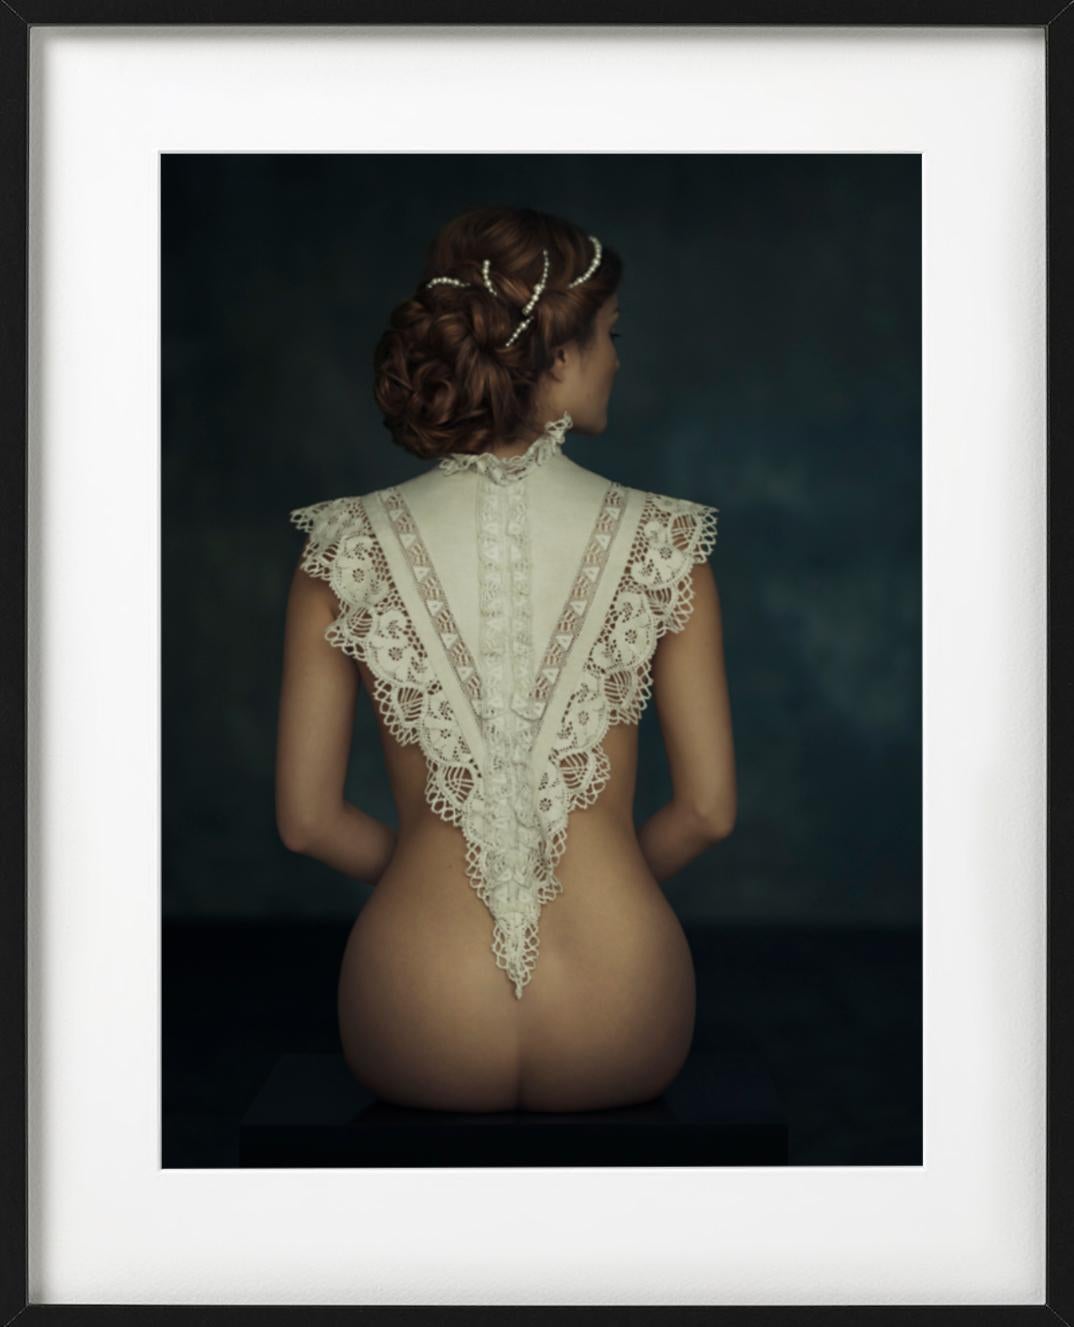 All prints are limited edition. Available in multiple sizes. High-end framing on request.

All prints are done and signed by the artist. The collector receives an additional certificate of authenticity from the gallery.

Using natural lighting and